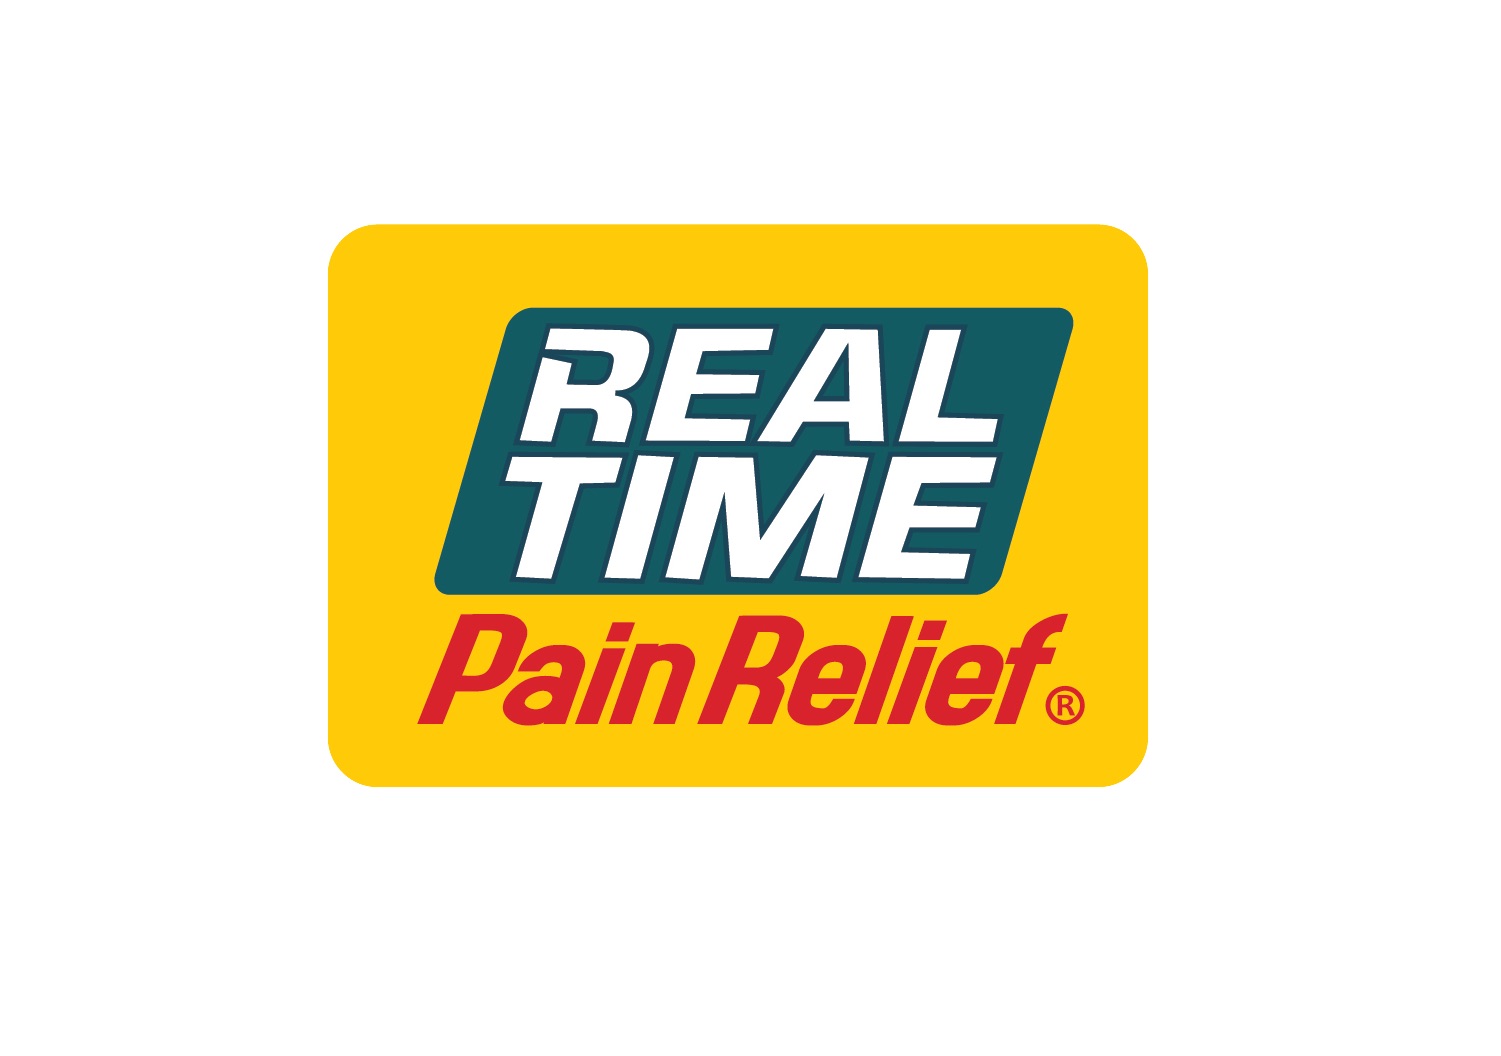 For over 20 years, Real Time Pain Relief has made fast-acting pain relief lotions available to families across America.